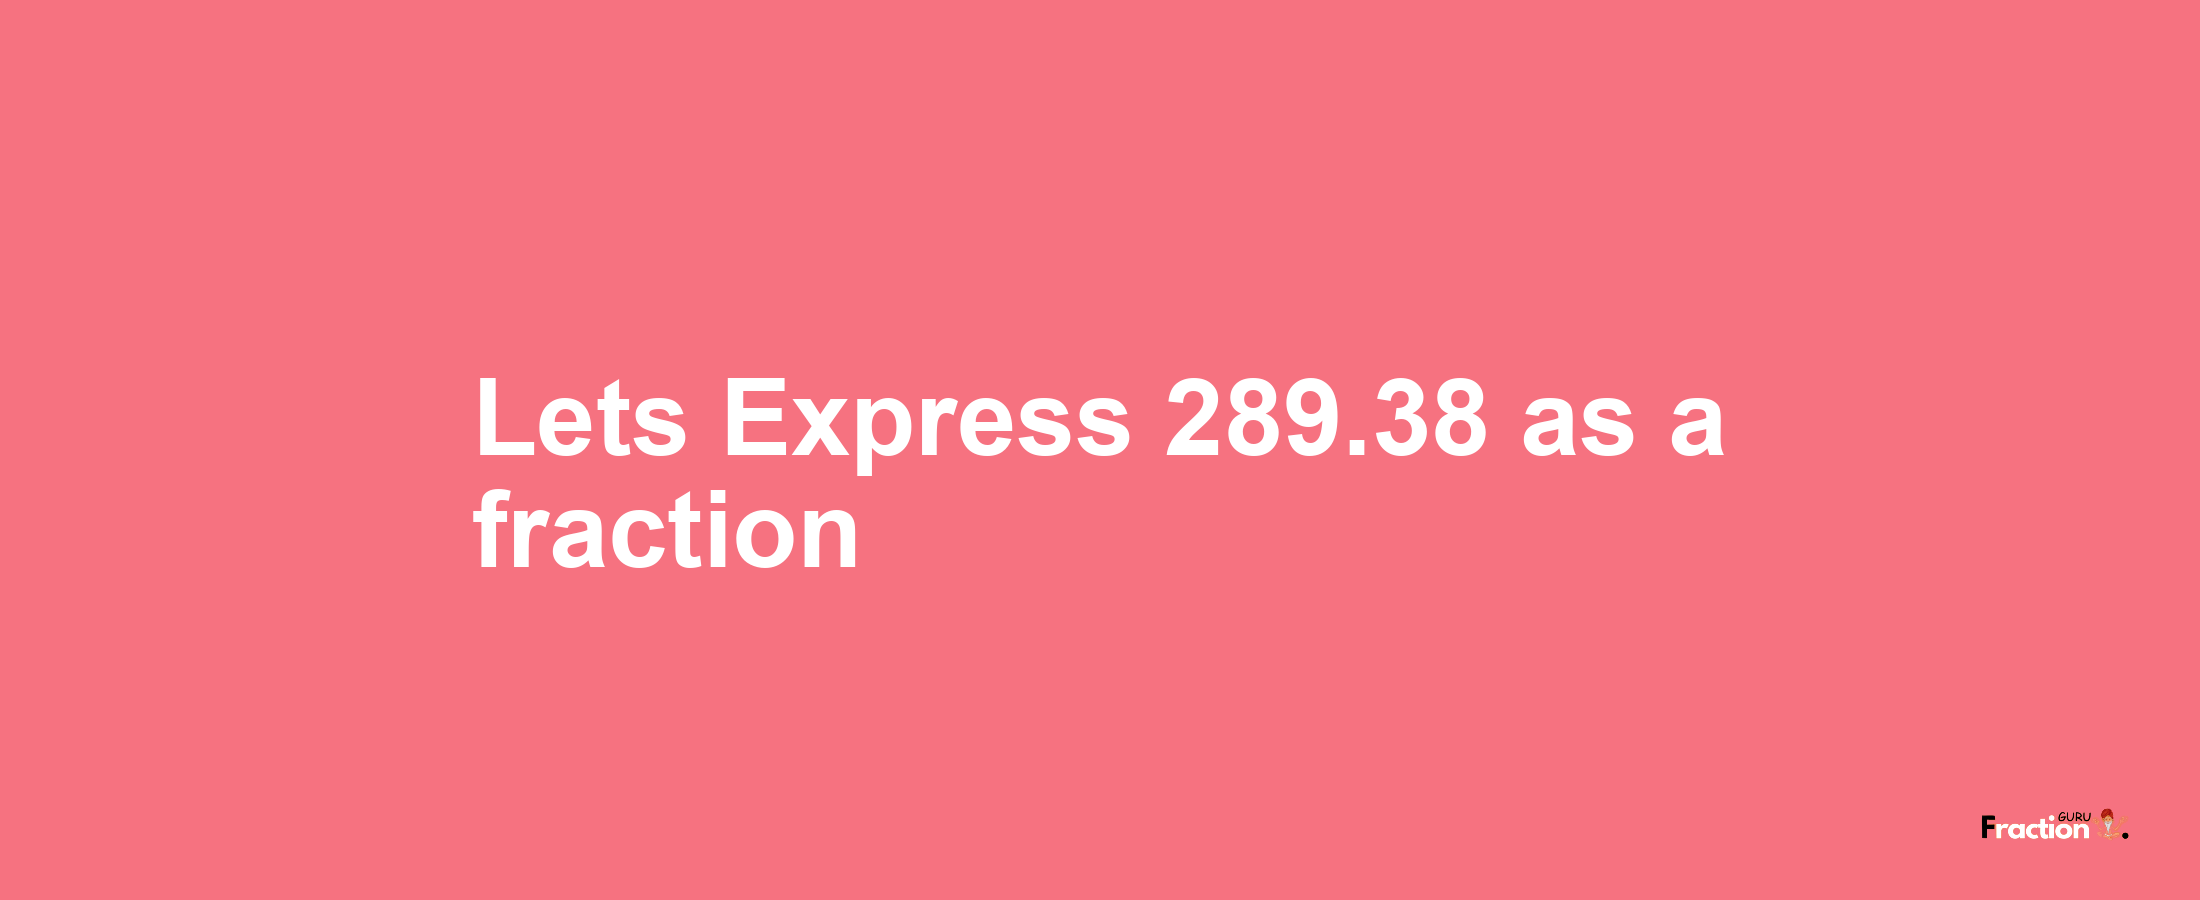 Lets Express 289.38 as afraction